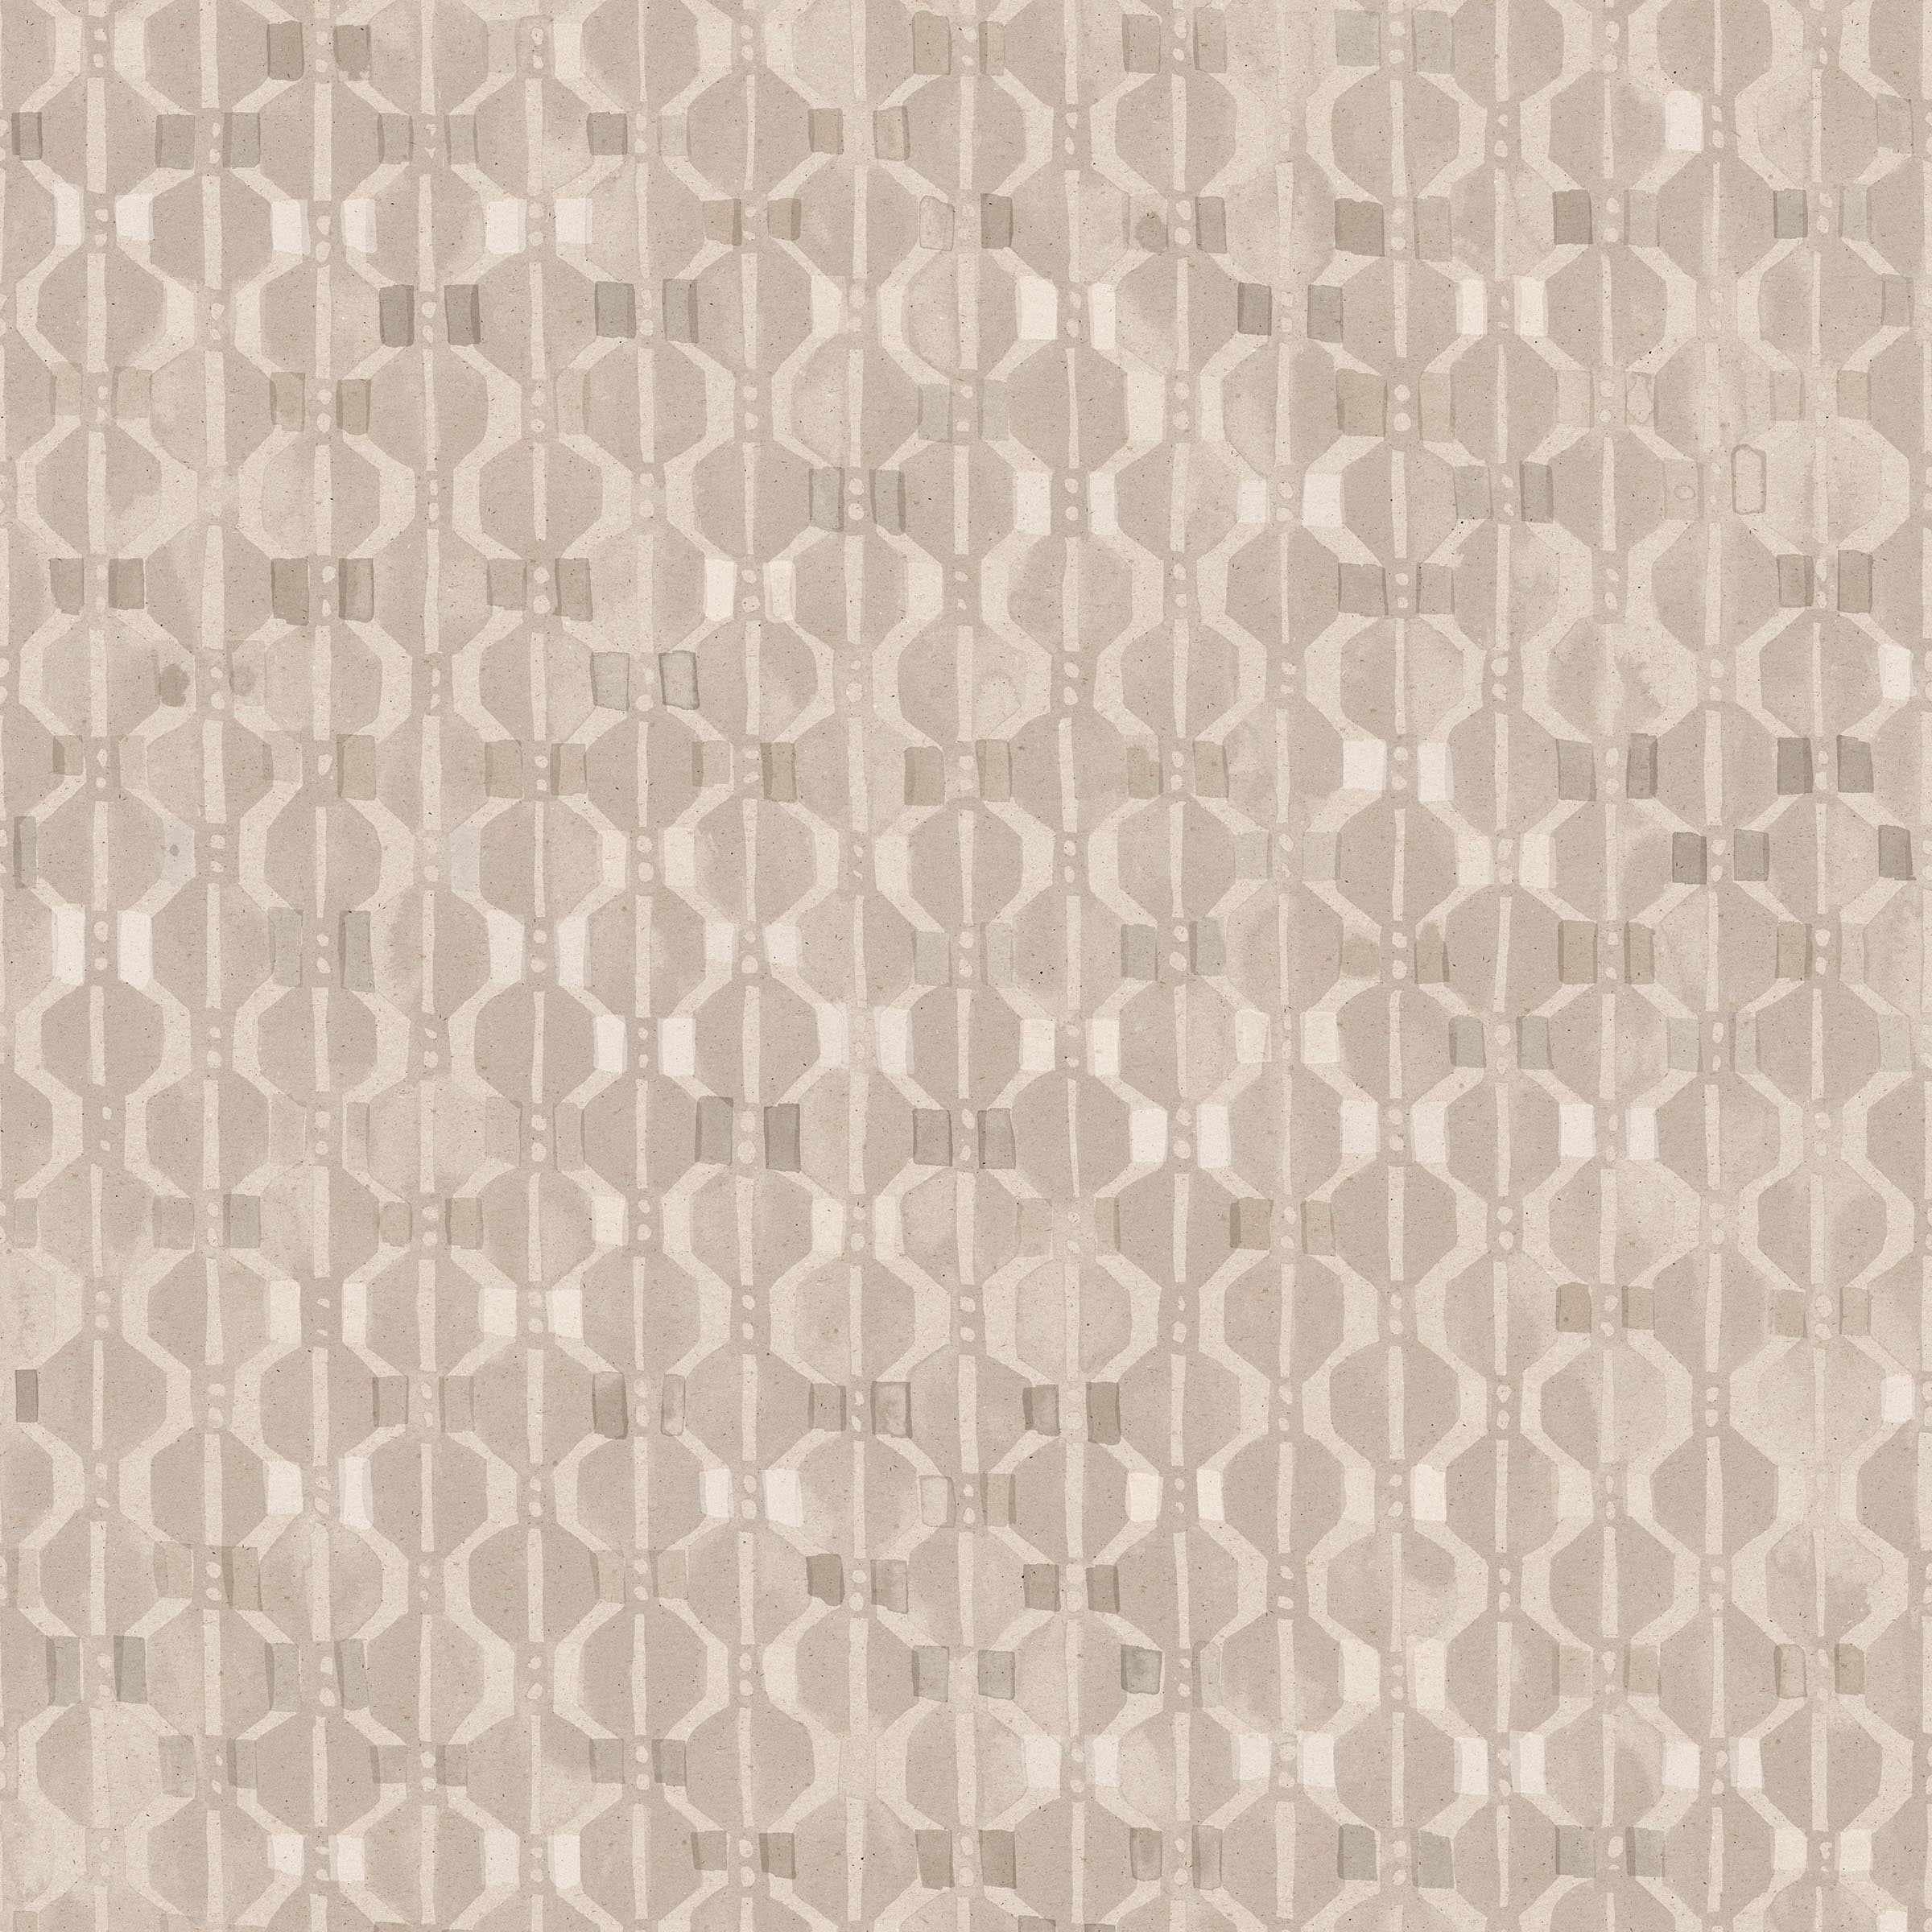 Detail of fabric in a geometric stripe pattern in shades of cream and gray.